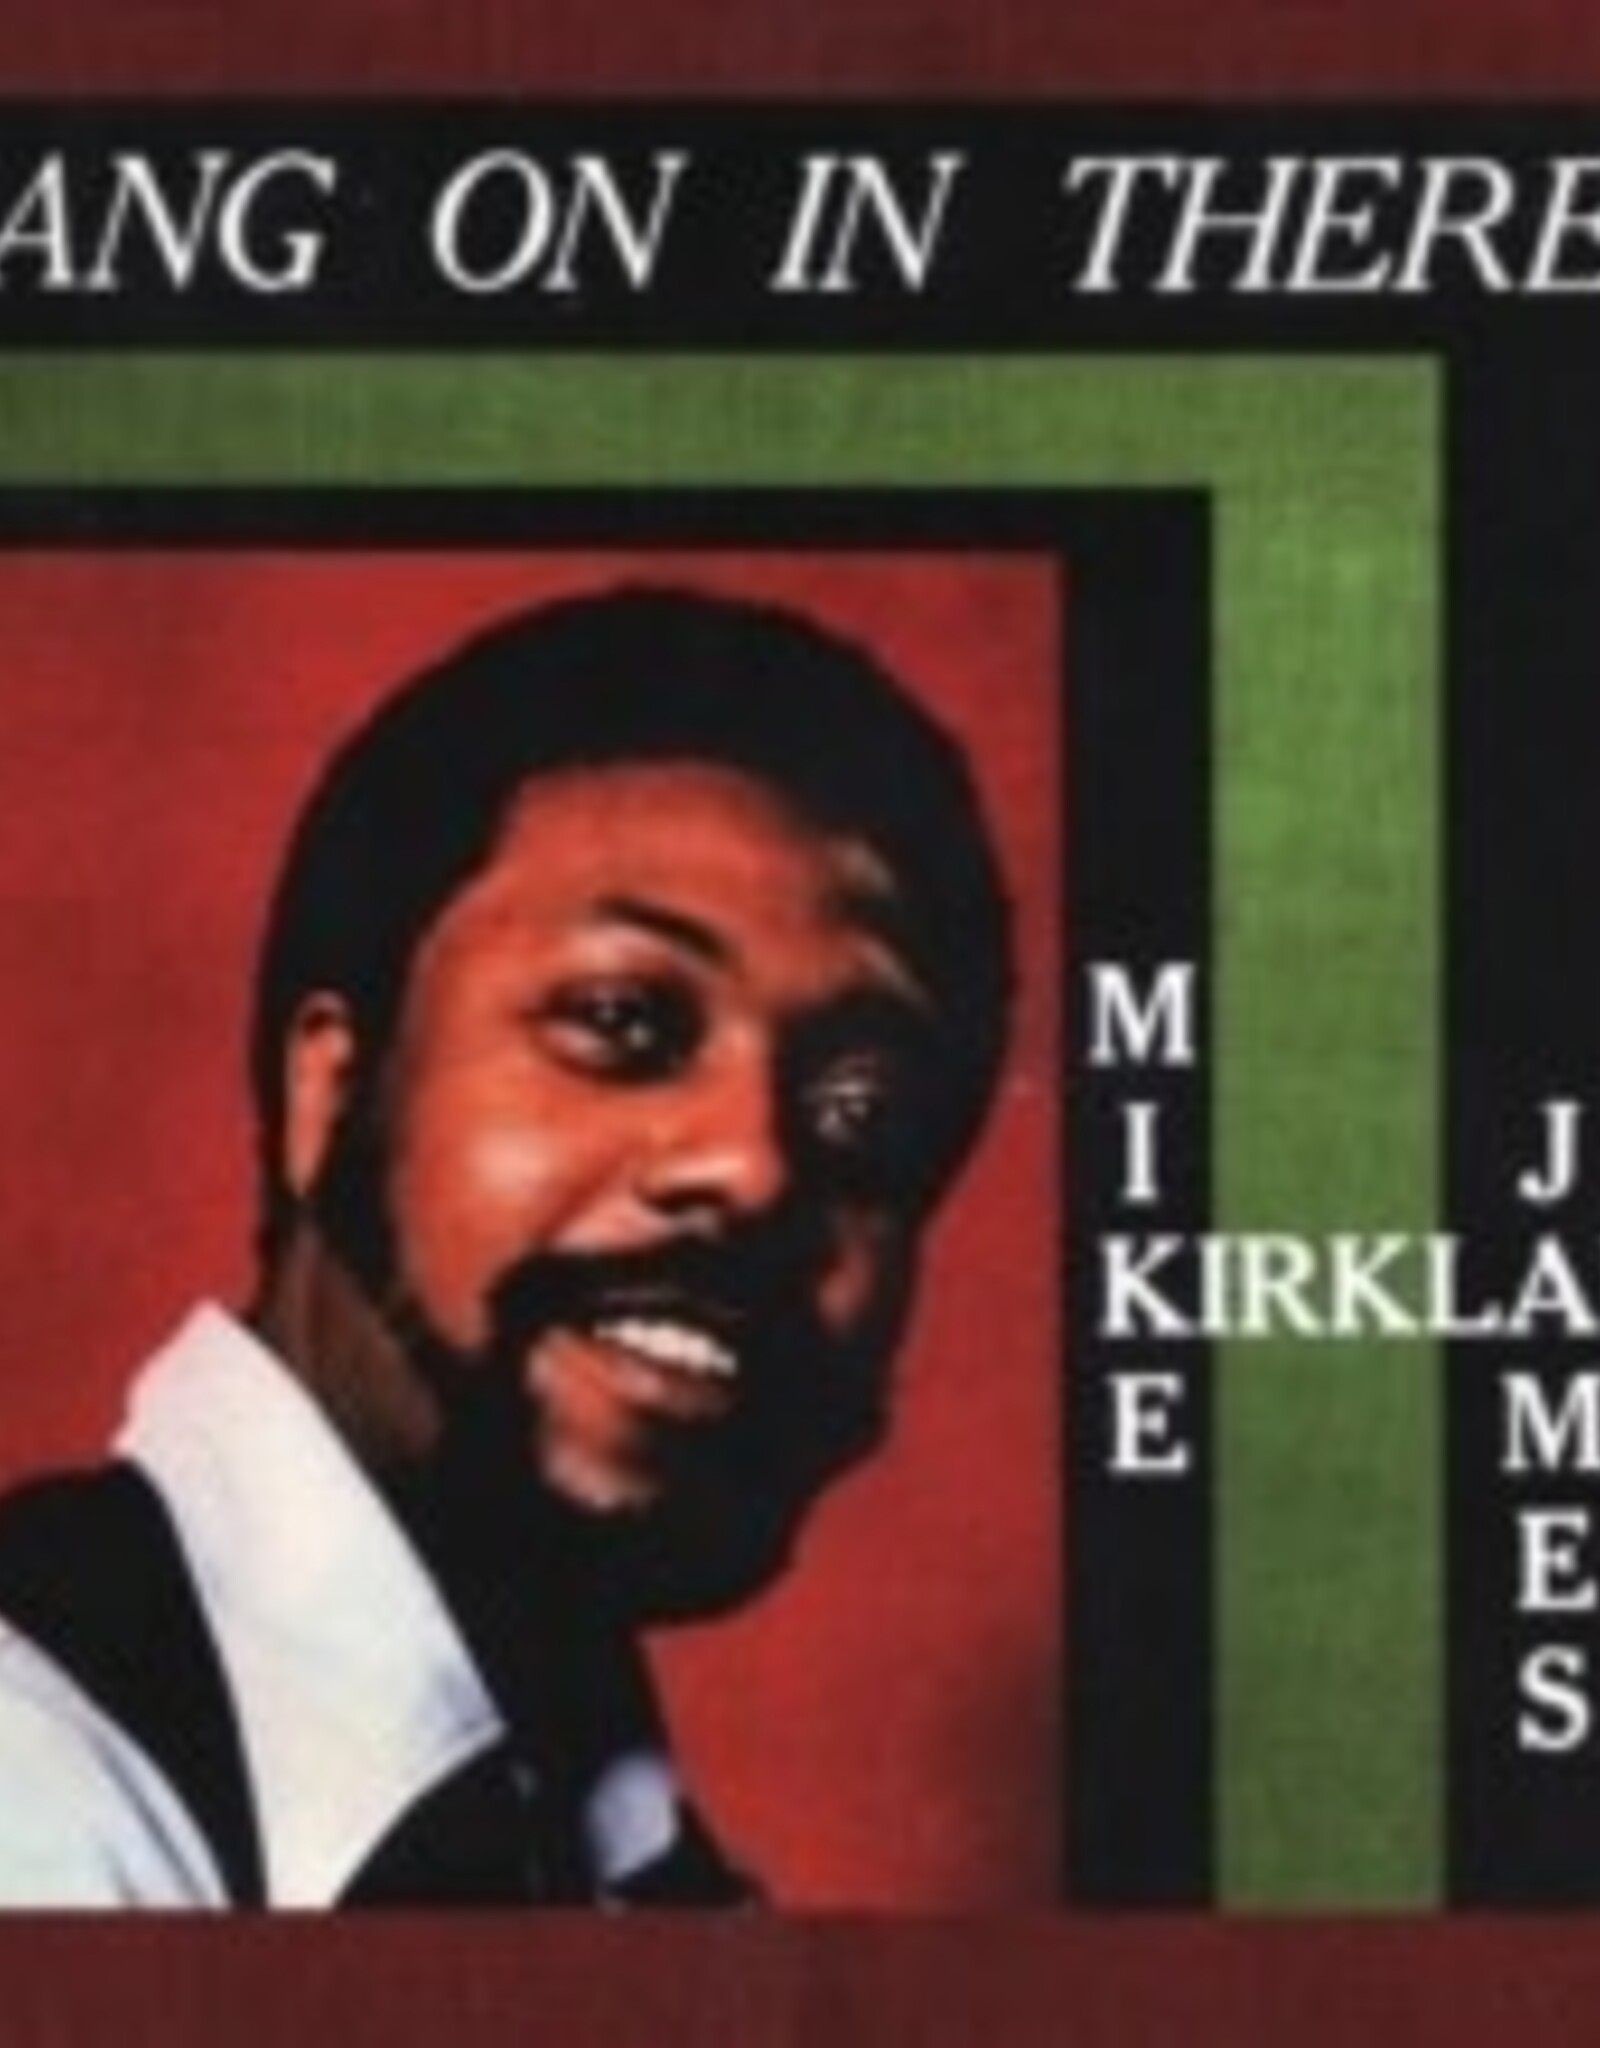 Mike James Kirkland	 - Hang On In There 	(RSDBF 2023)